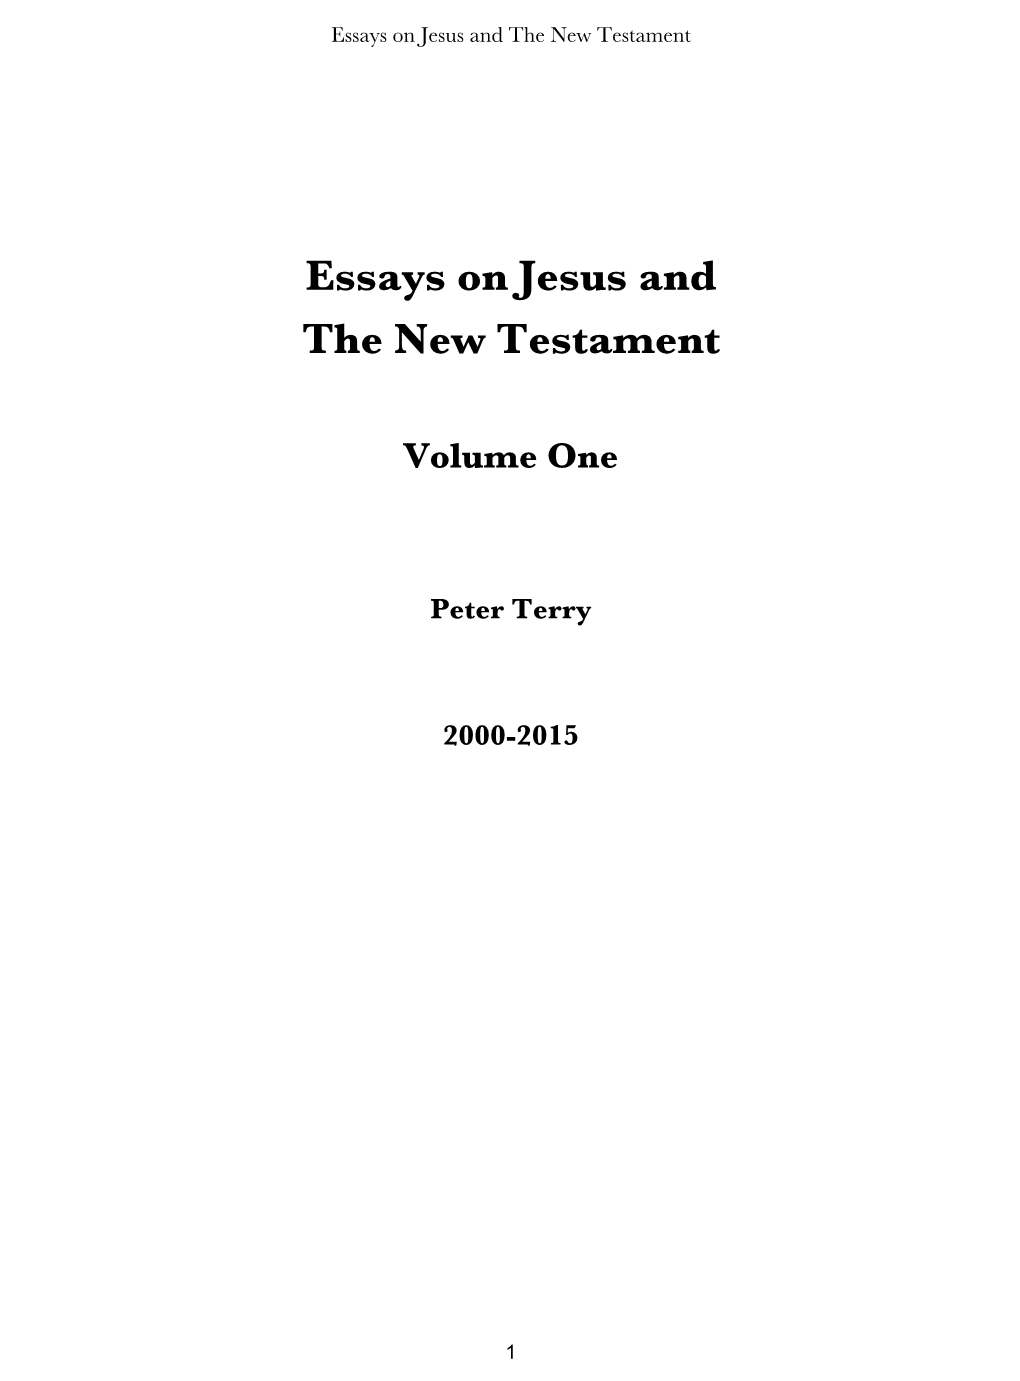 Essays on Jesus and the New Testament